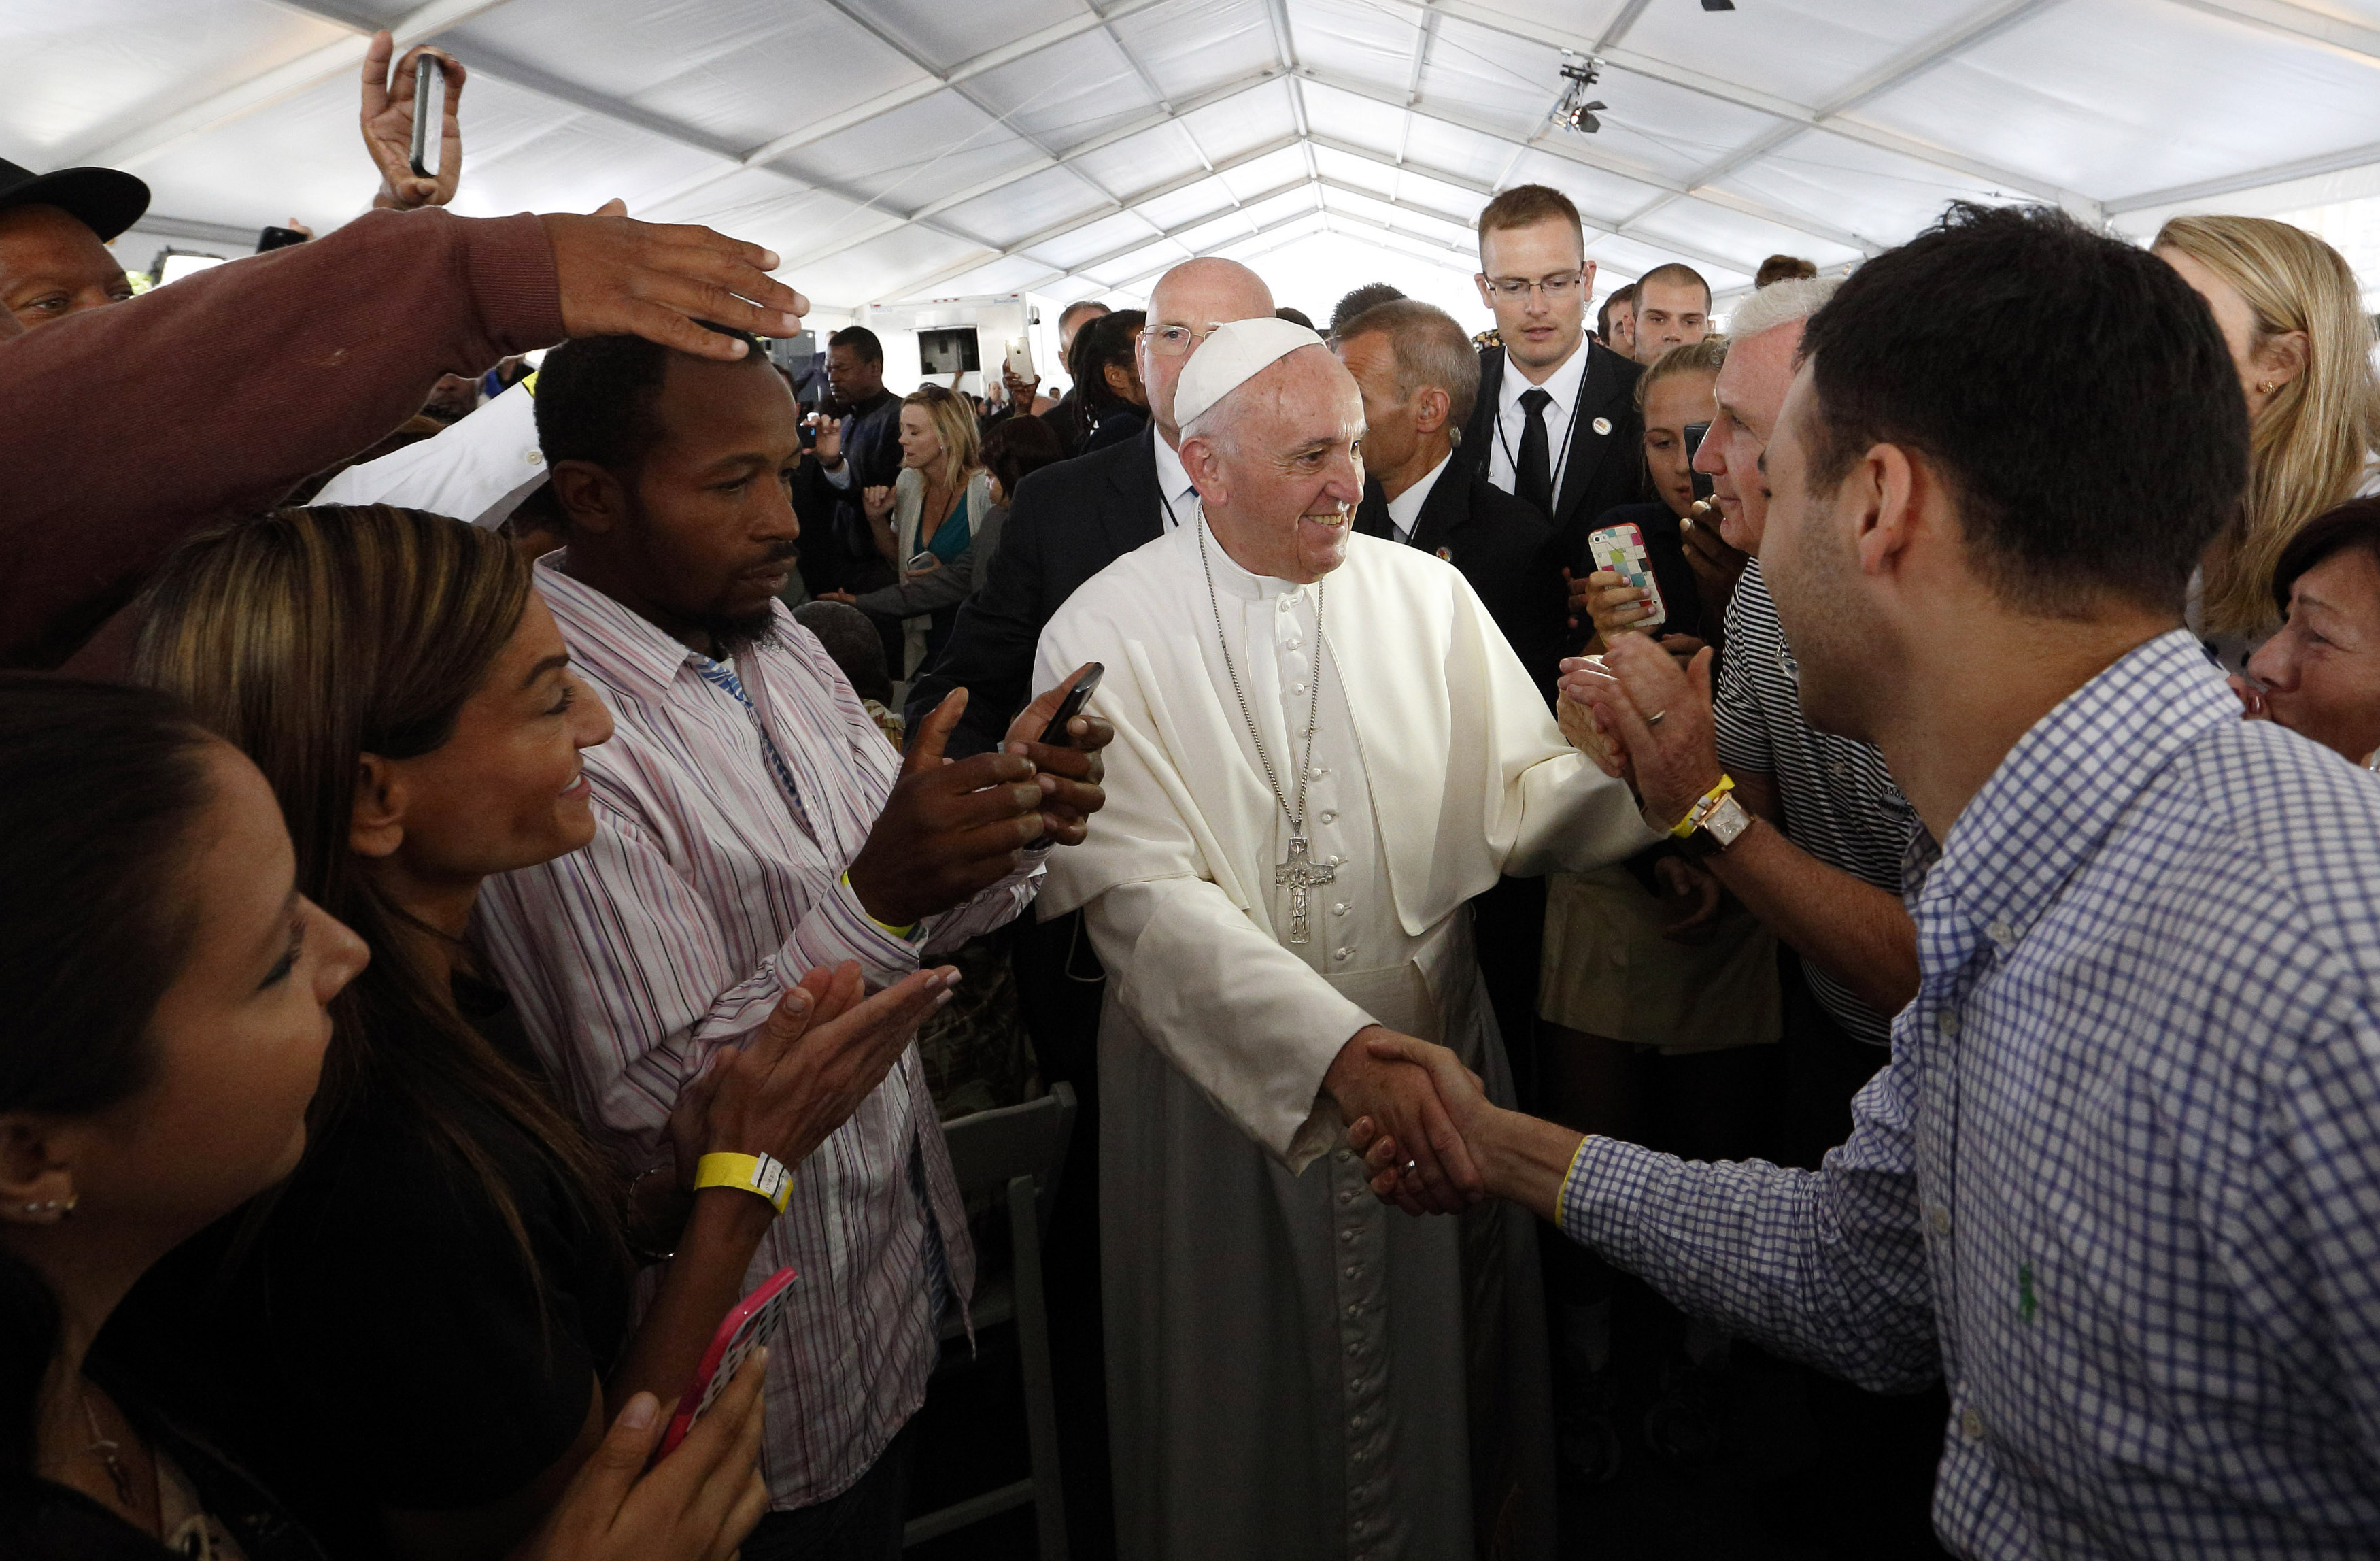 Pope Francis meets people involved with St. Maria's Meals Program of Catholic Charities in Washington Sept. 24. (CNS/Paul Haring)